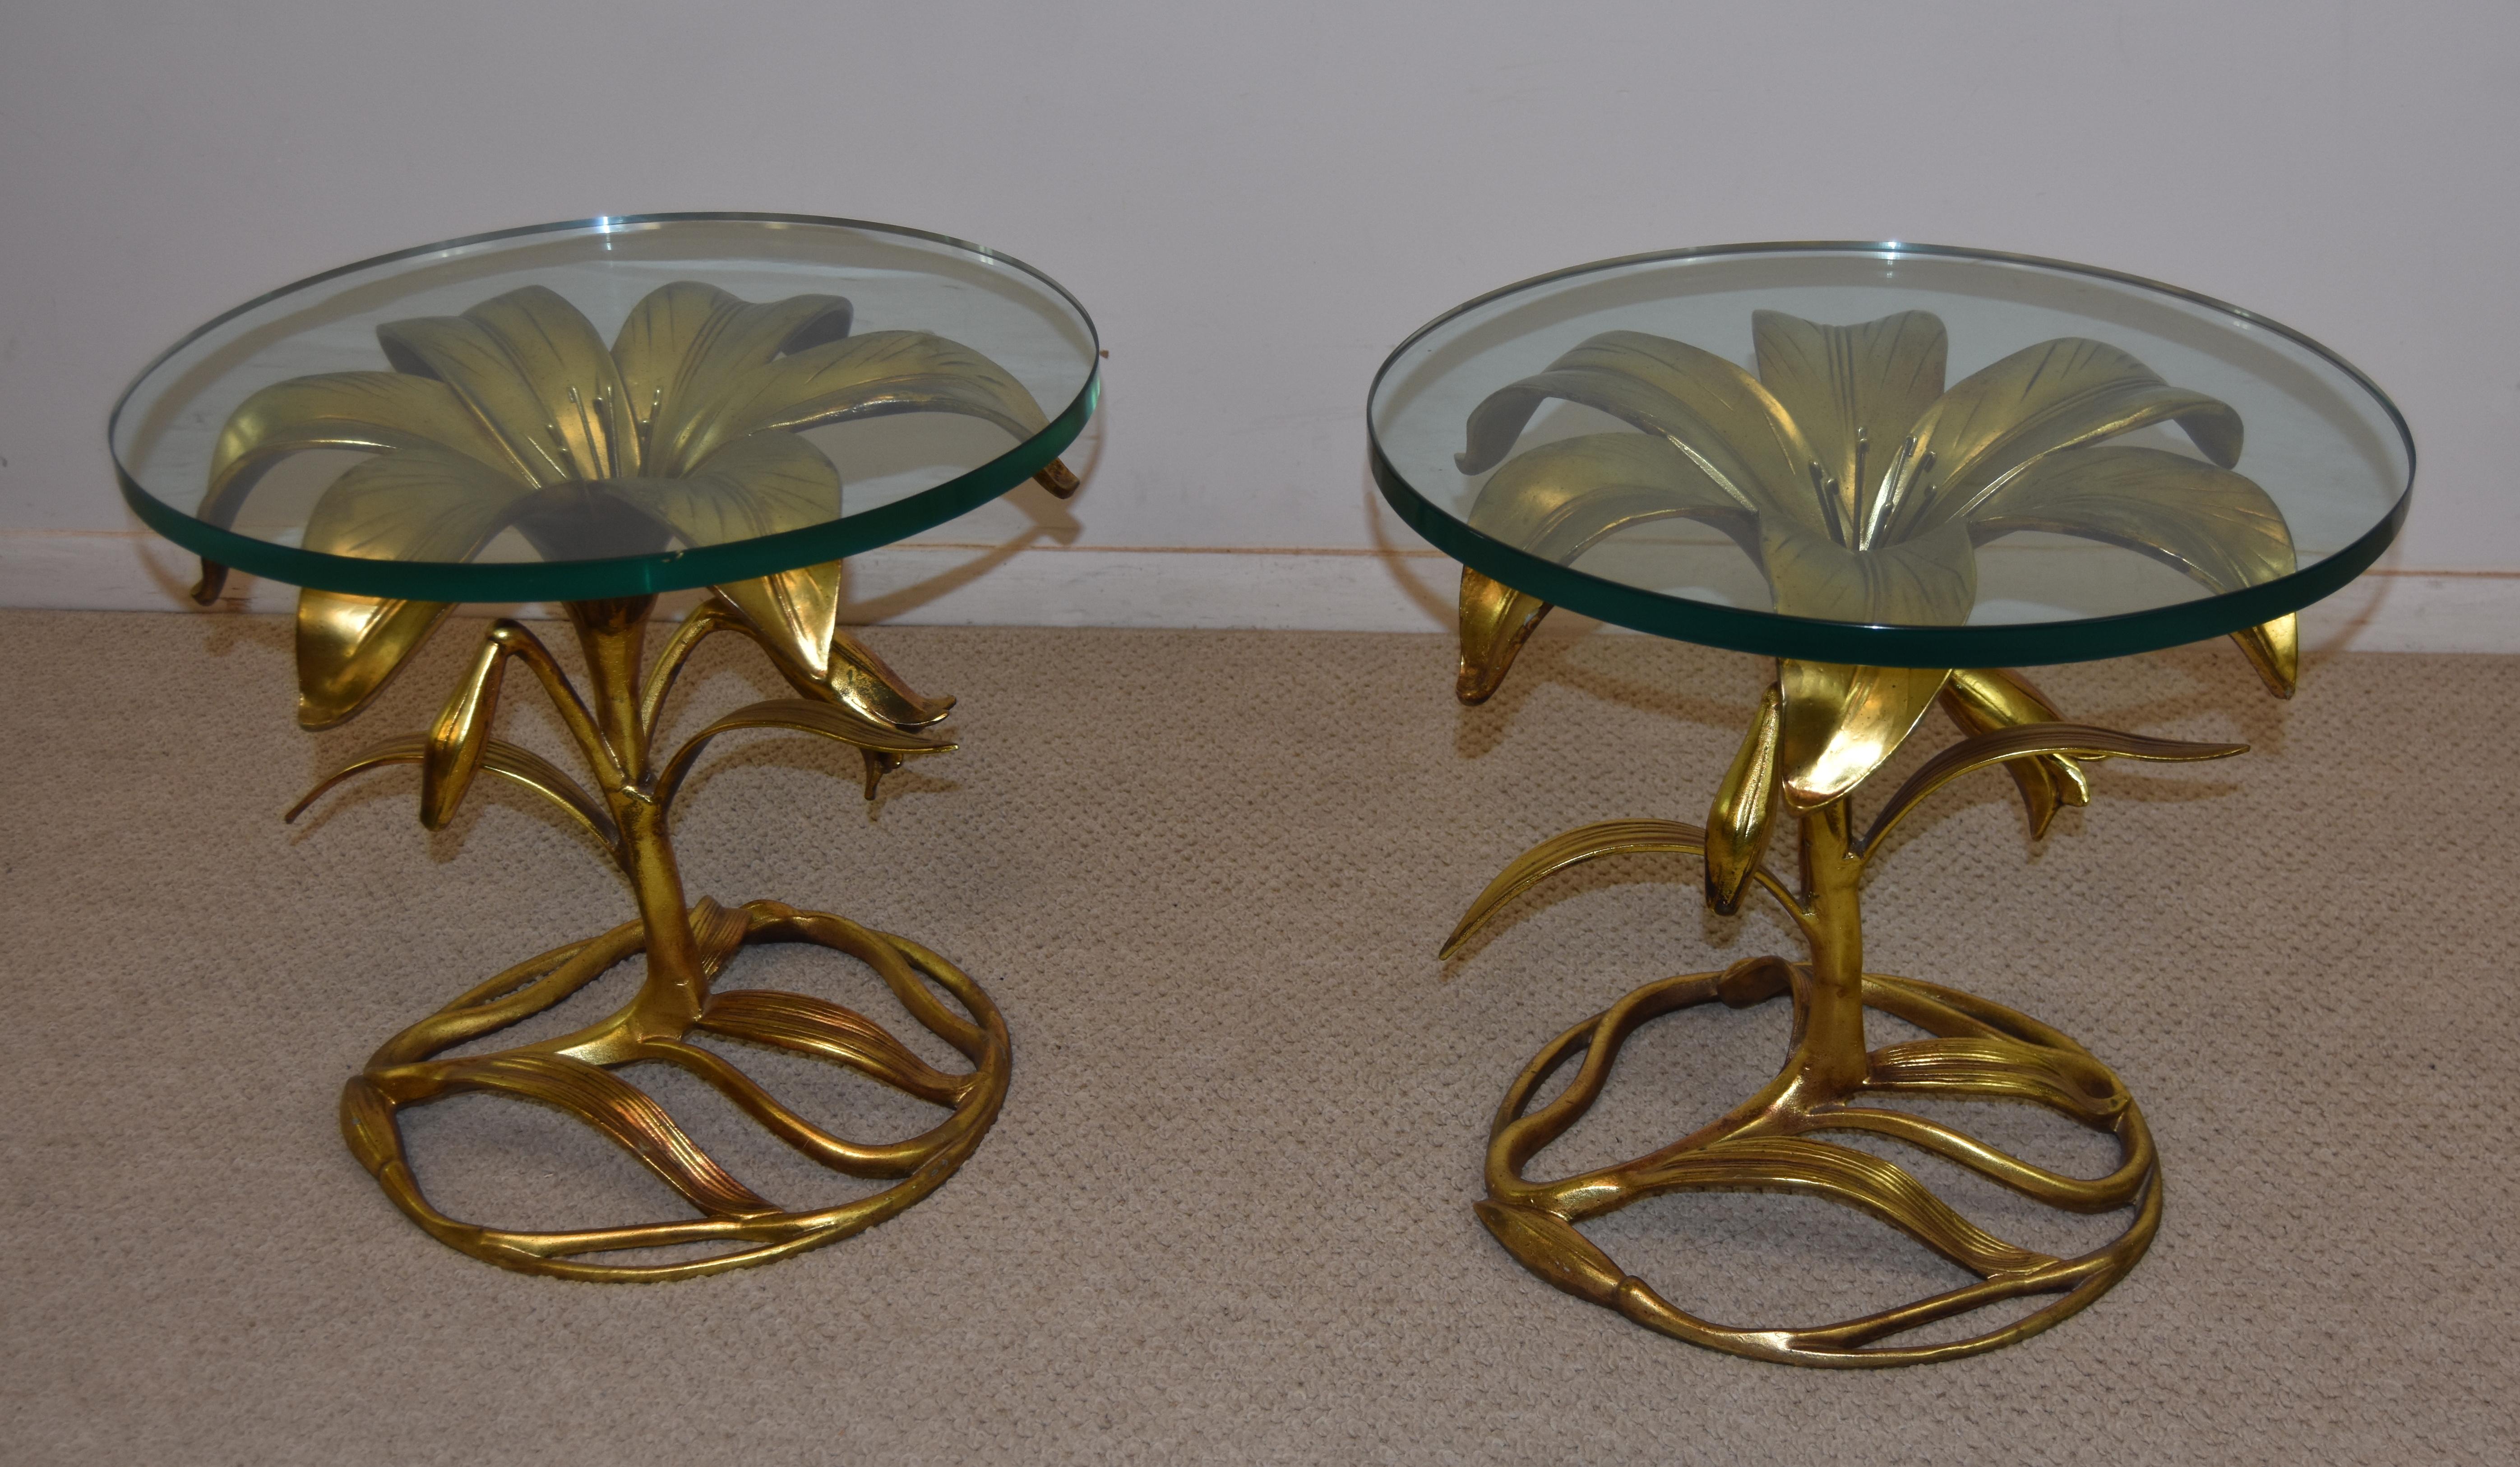 Pair of gold leafed aluminum side tables in lily flower form by Arthur Court. Thick beveled 3/4